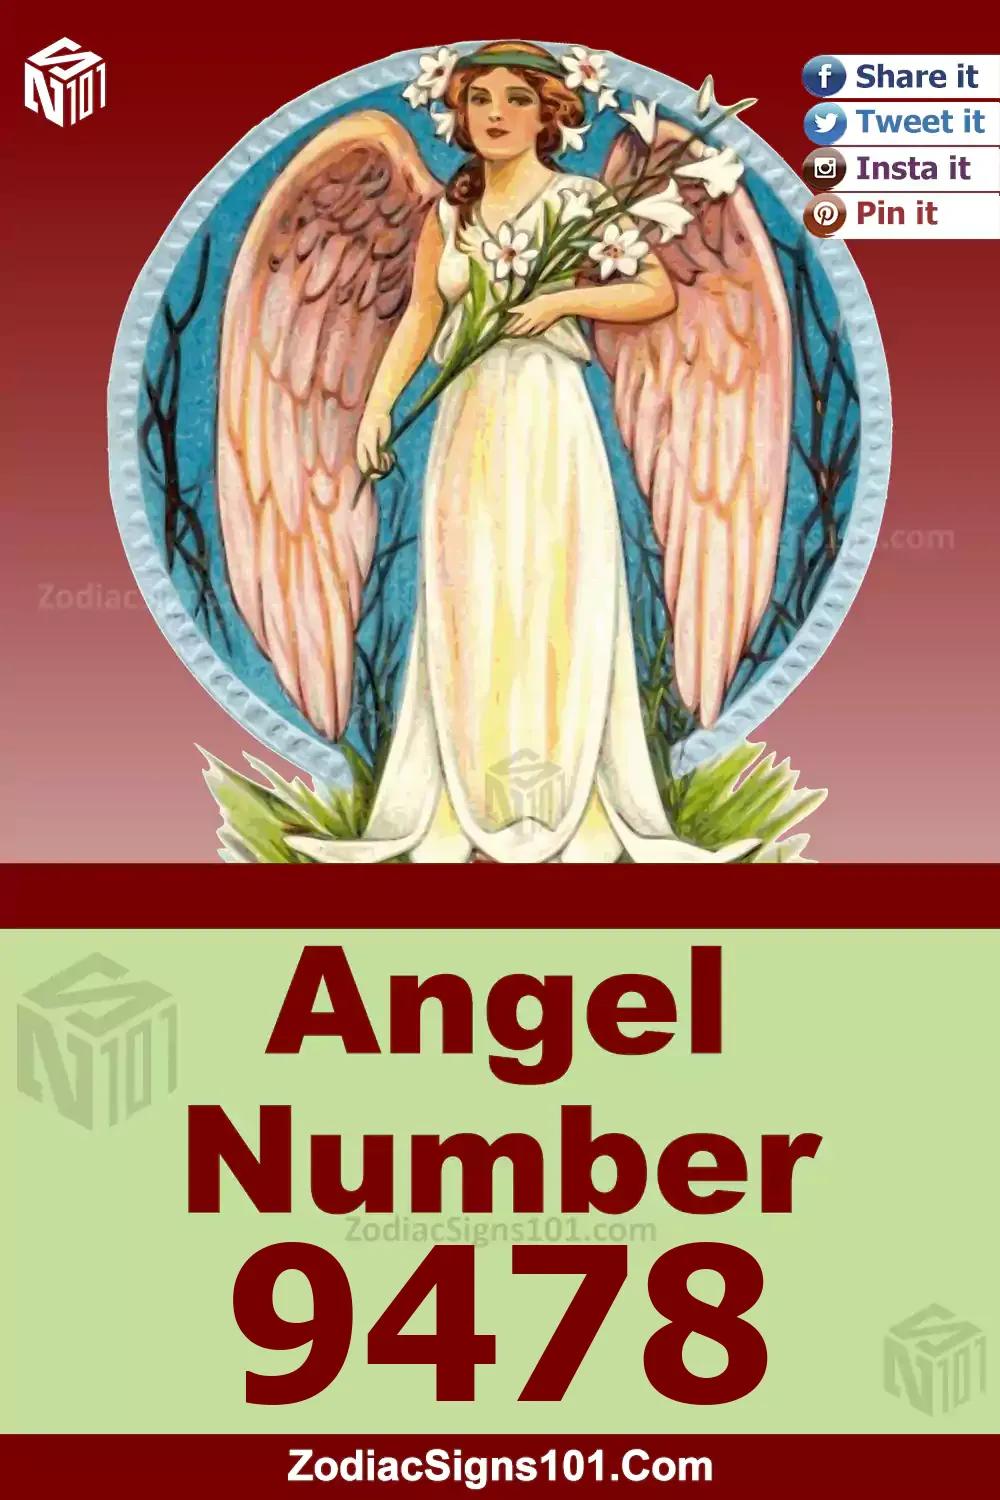 9478 Angel Number Meaning